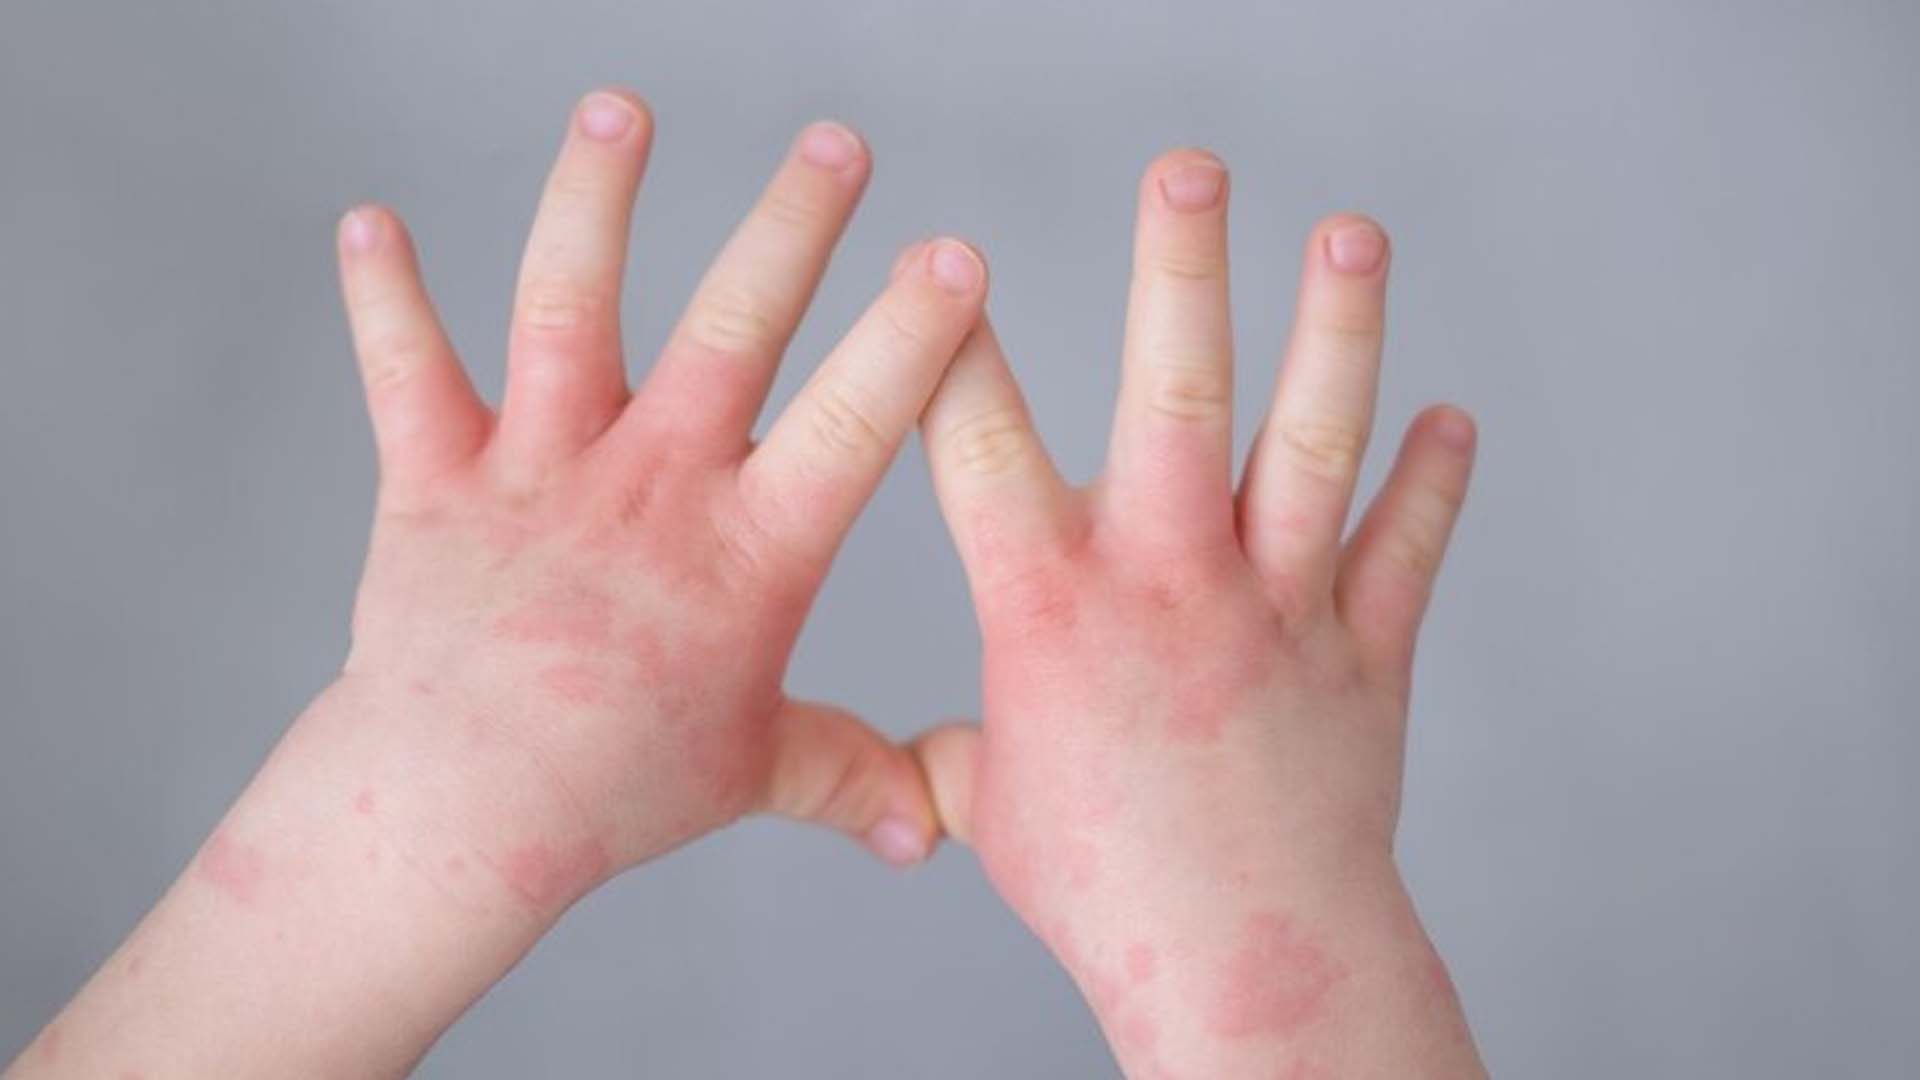 What are the Home Remedies for Eczema on Hands and Fingers?